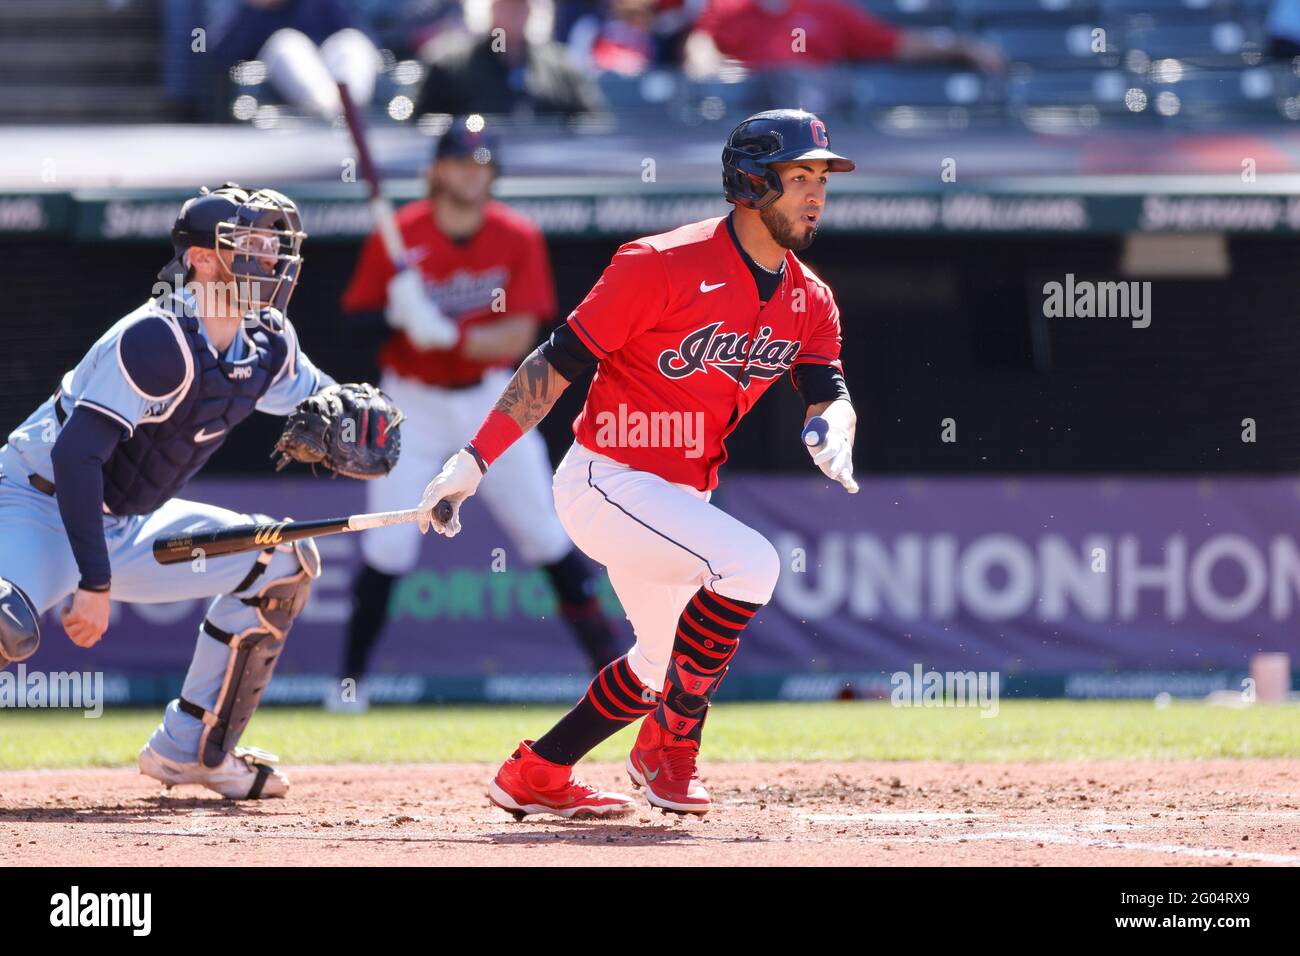 CLEVELAND, OH - May 30: Eddie Rosario (9) of the Cleveland Indians bats during game two of a doubleheader against the Toronto Blue Jays at Progressive Stock Photo